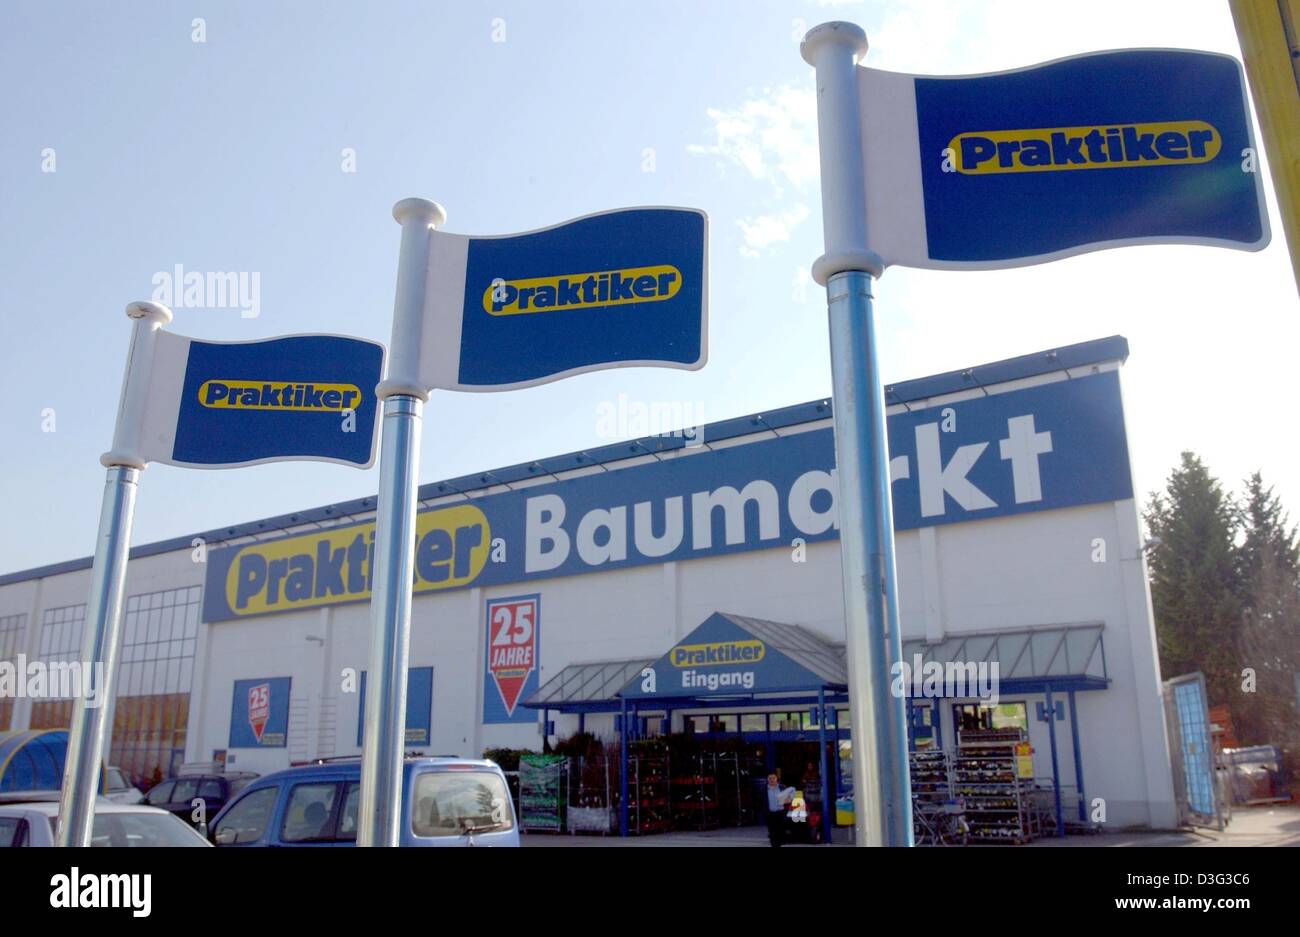 (dpa) - Flags with the company logo of the German DIY store Praktiker fly in front of a store in Cologne, 26 February 2003. Praktiker is a subsidiary company of METRO. After suffering losses Metro might now sell the DIY store chain. Stock Photo